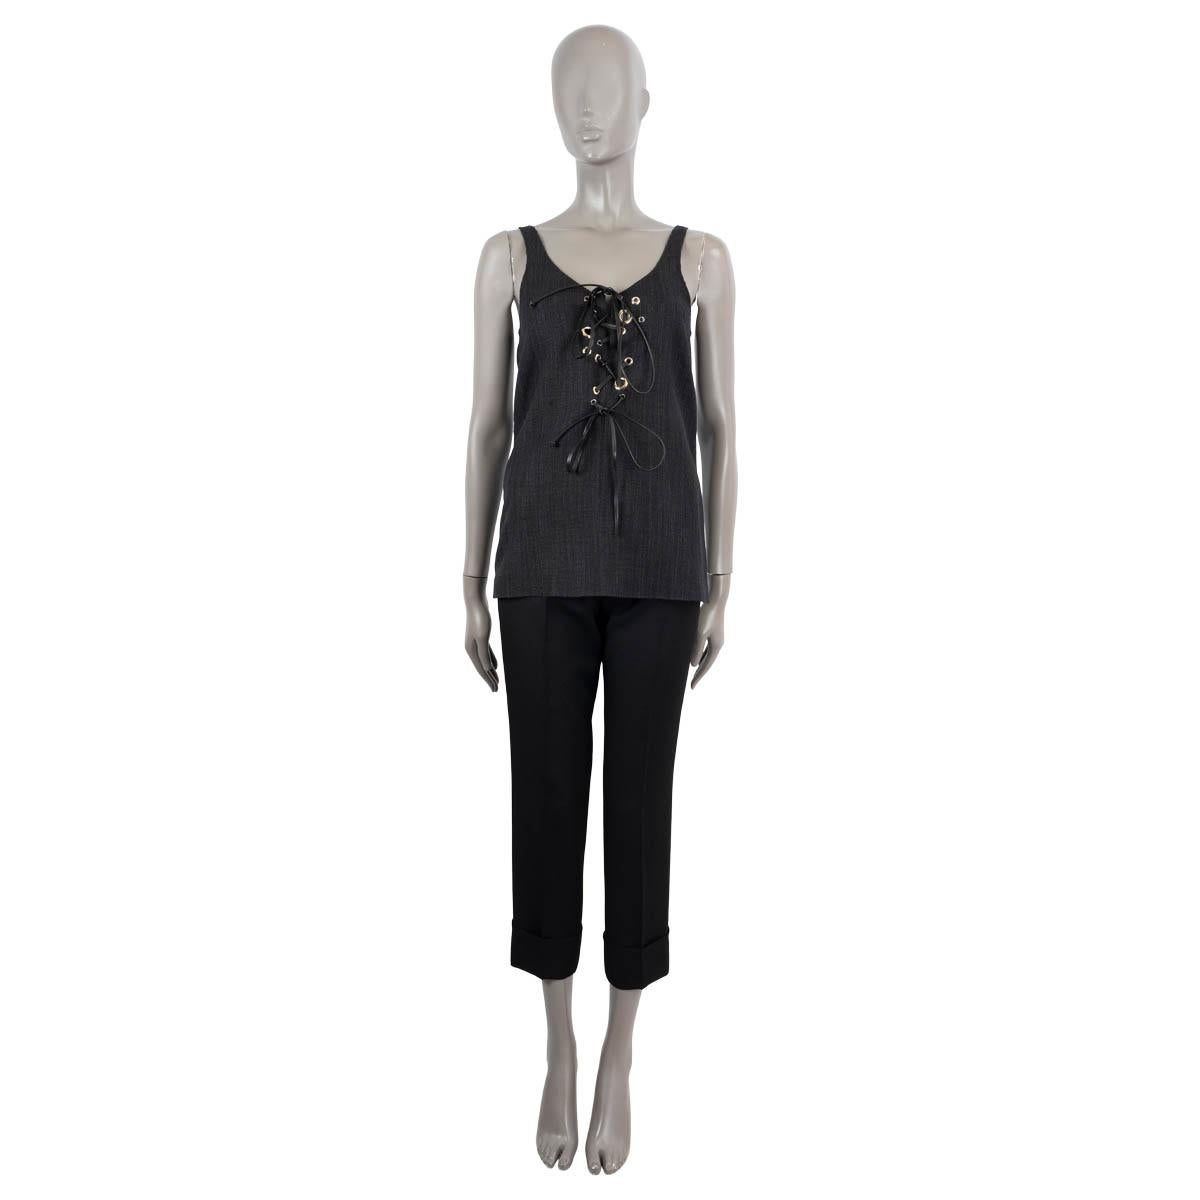 100% authentic Chloé lace-up tank top in black silk (62%), wool(25%) linen (11%) and polyamide (2%). Features scattered light gold-tone eyelets along the front with slim black leather ties. Brand new with tags. 

2022 Spring/Summer

Measurements
Tag